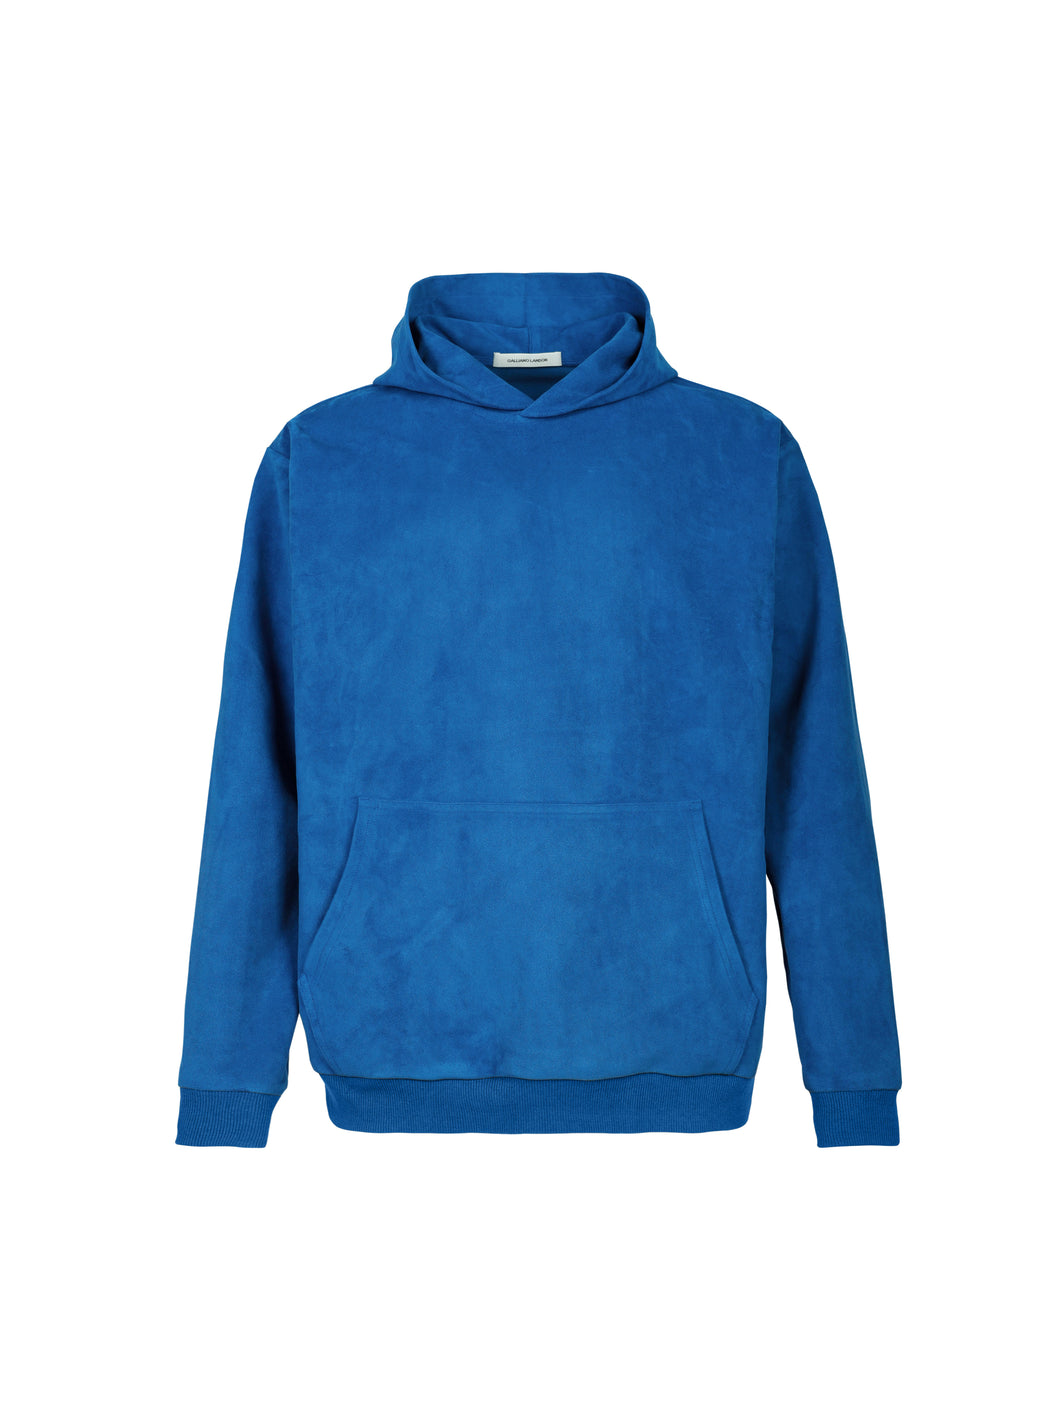 Blue Suede Fabric Hooded Sweater